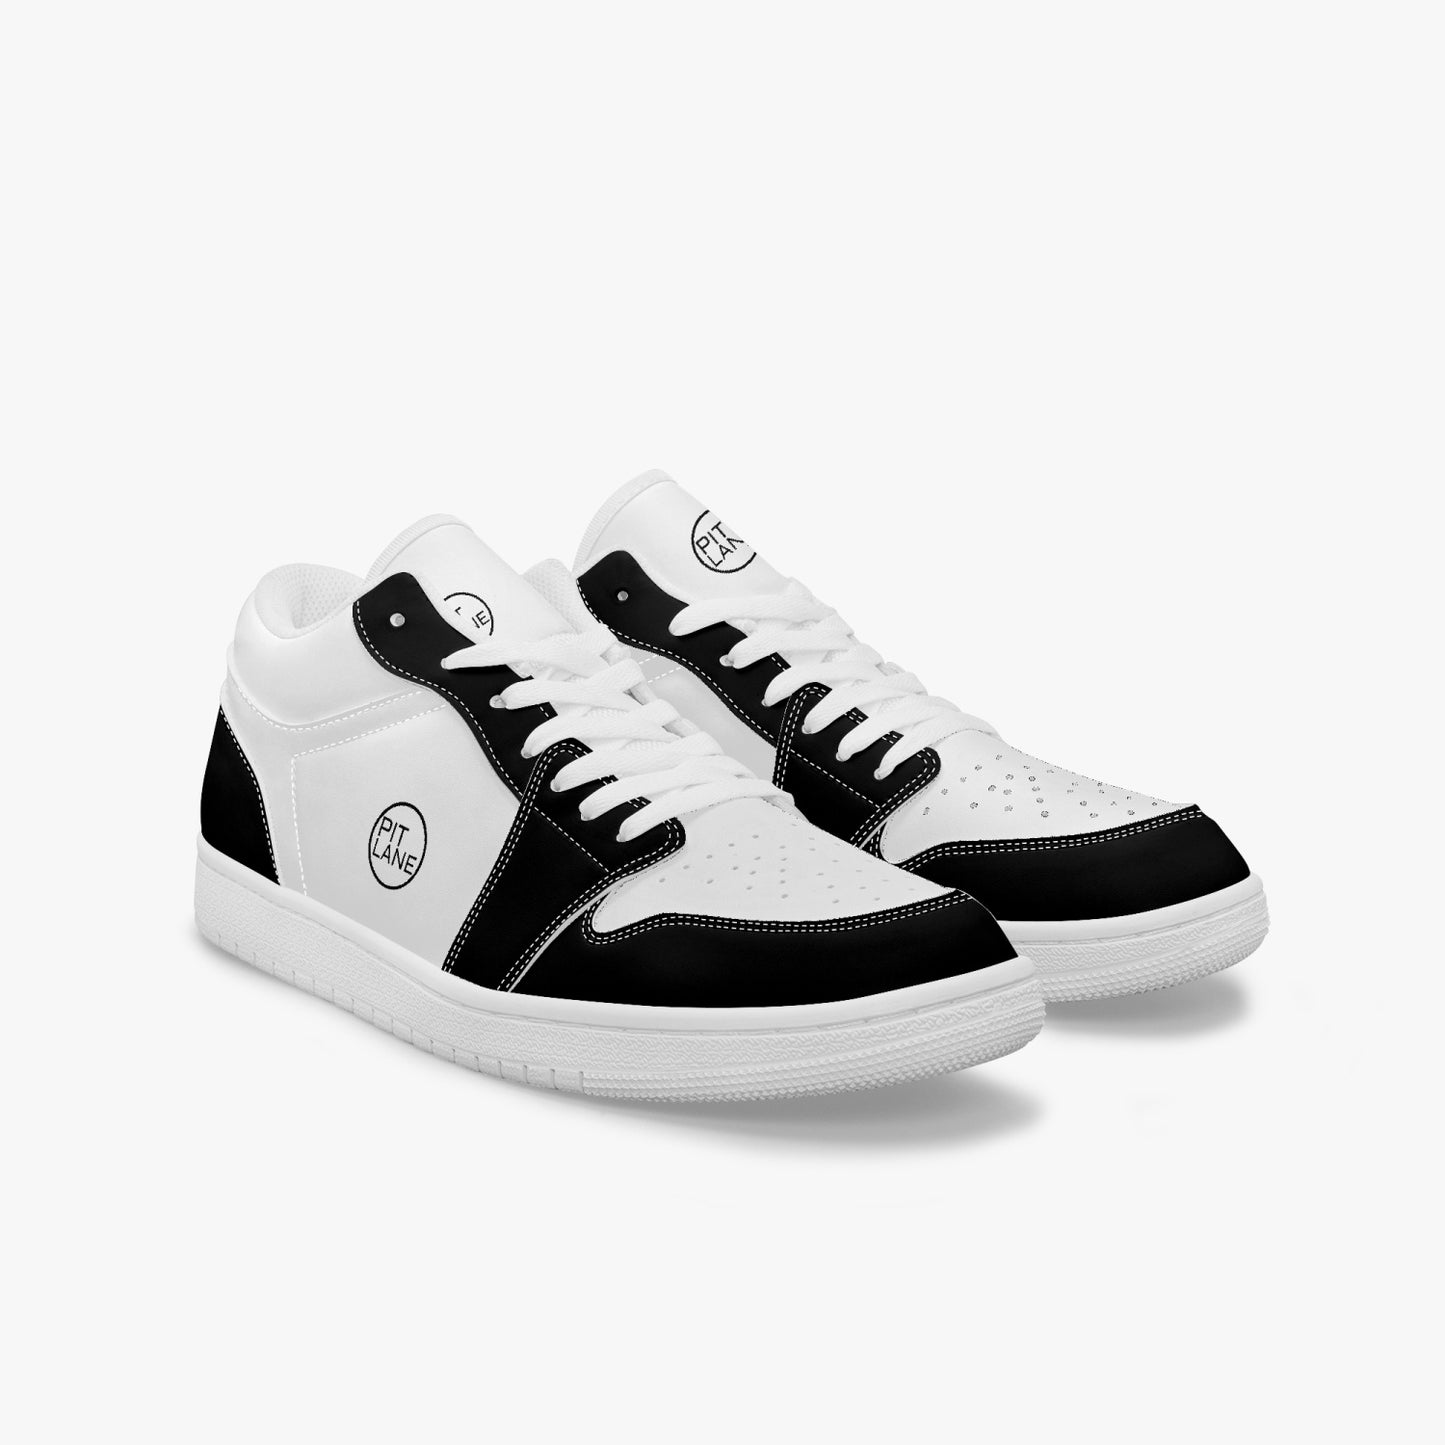 PIT LANE CLOTHING Black White Street Leather Sneakers